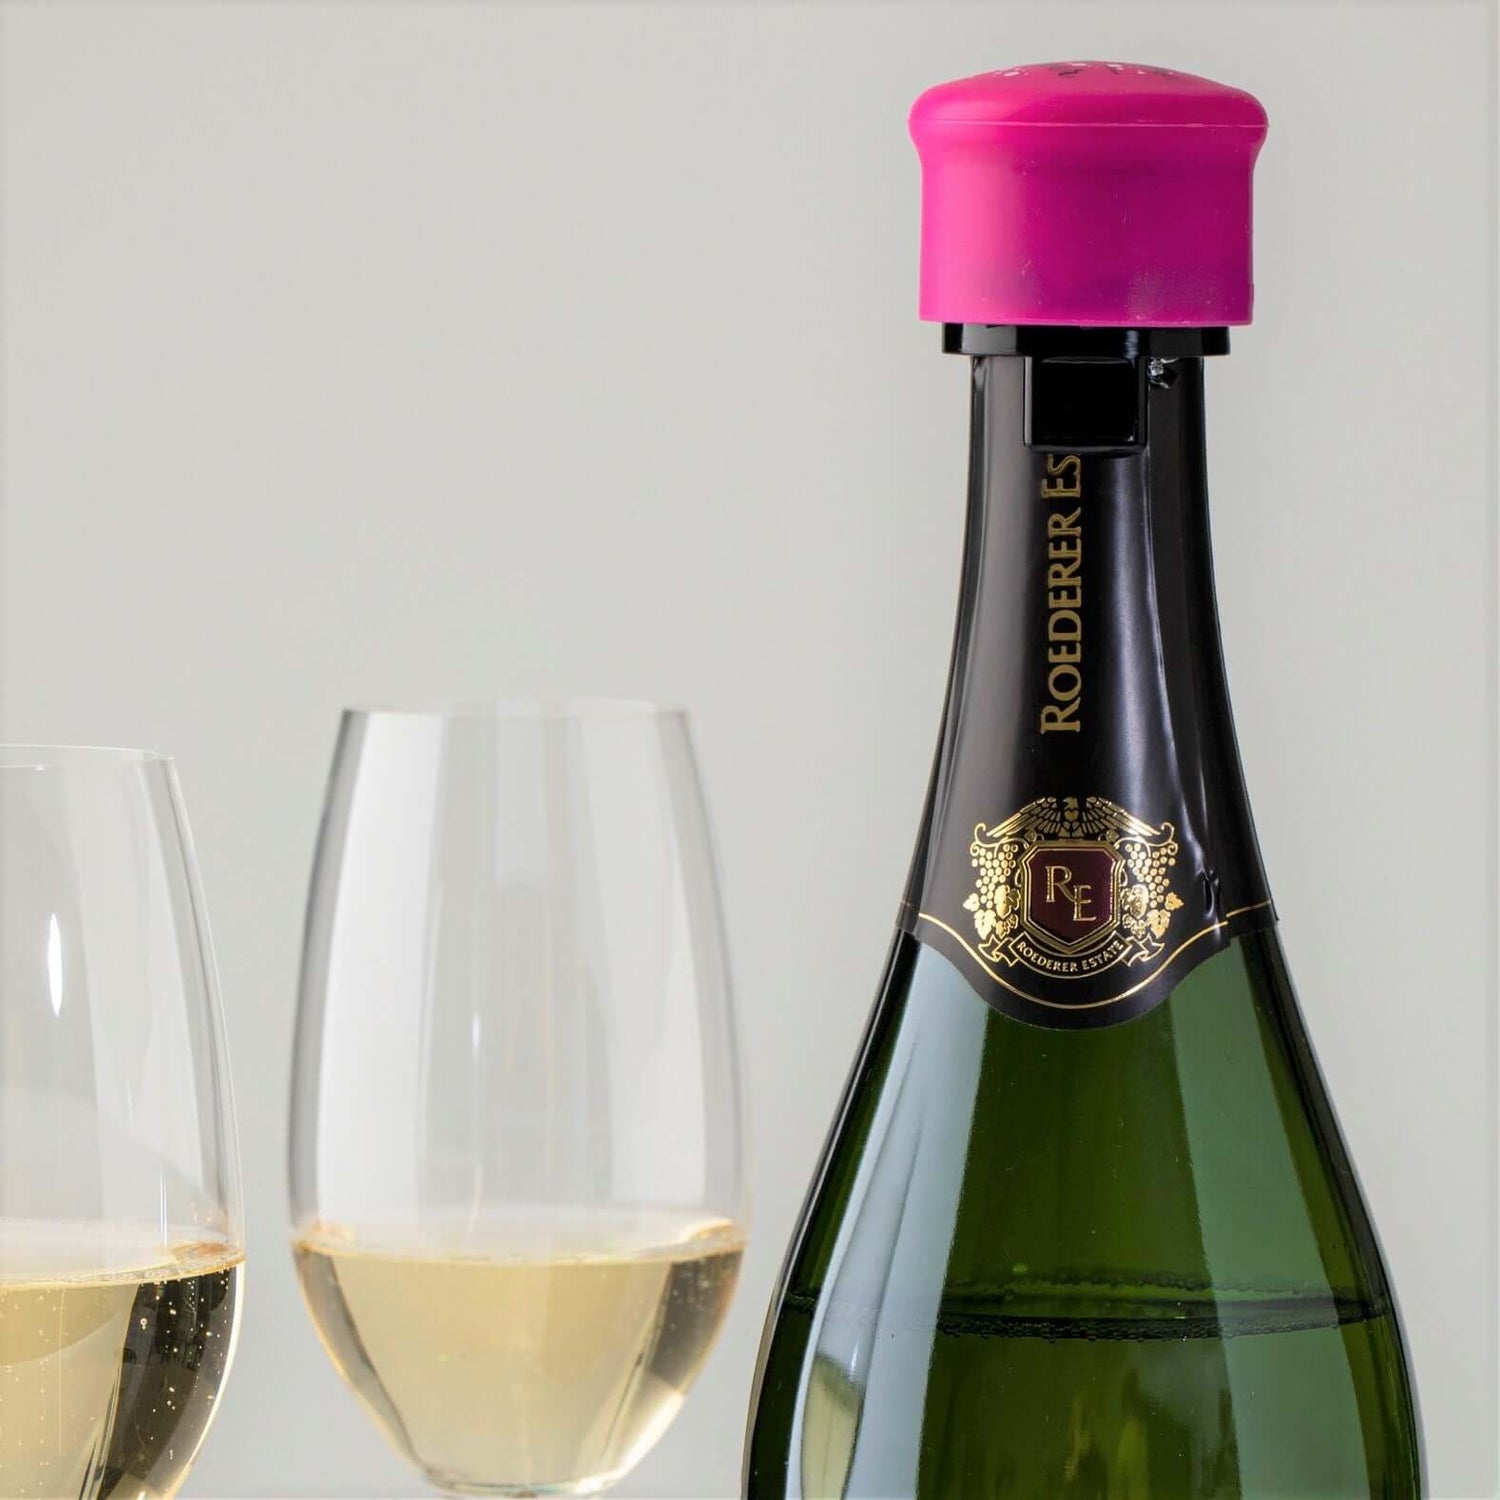 CapaBunga Capabubbles® Champagne Is the Answer Champagne Stopper